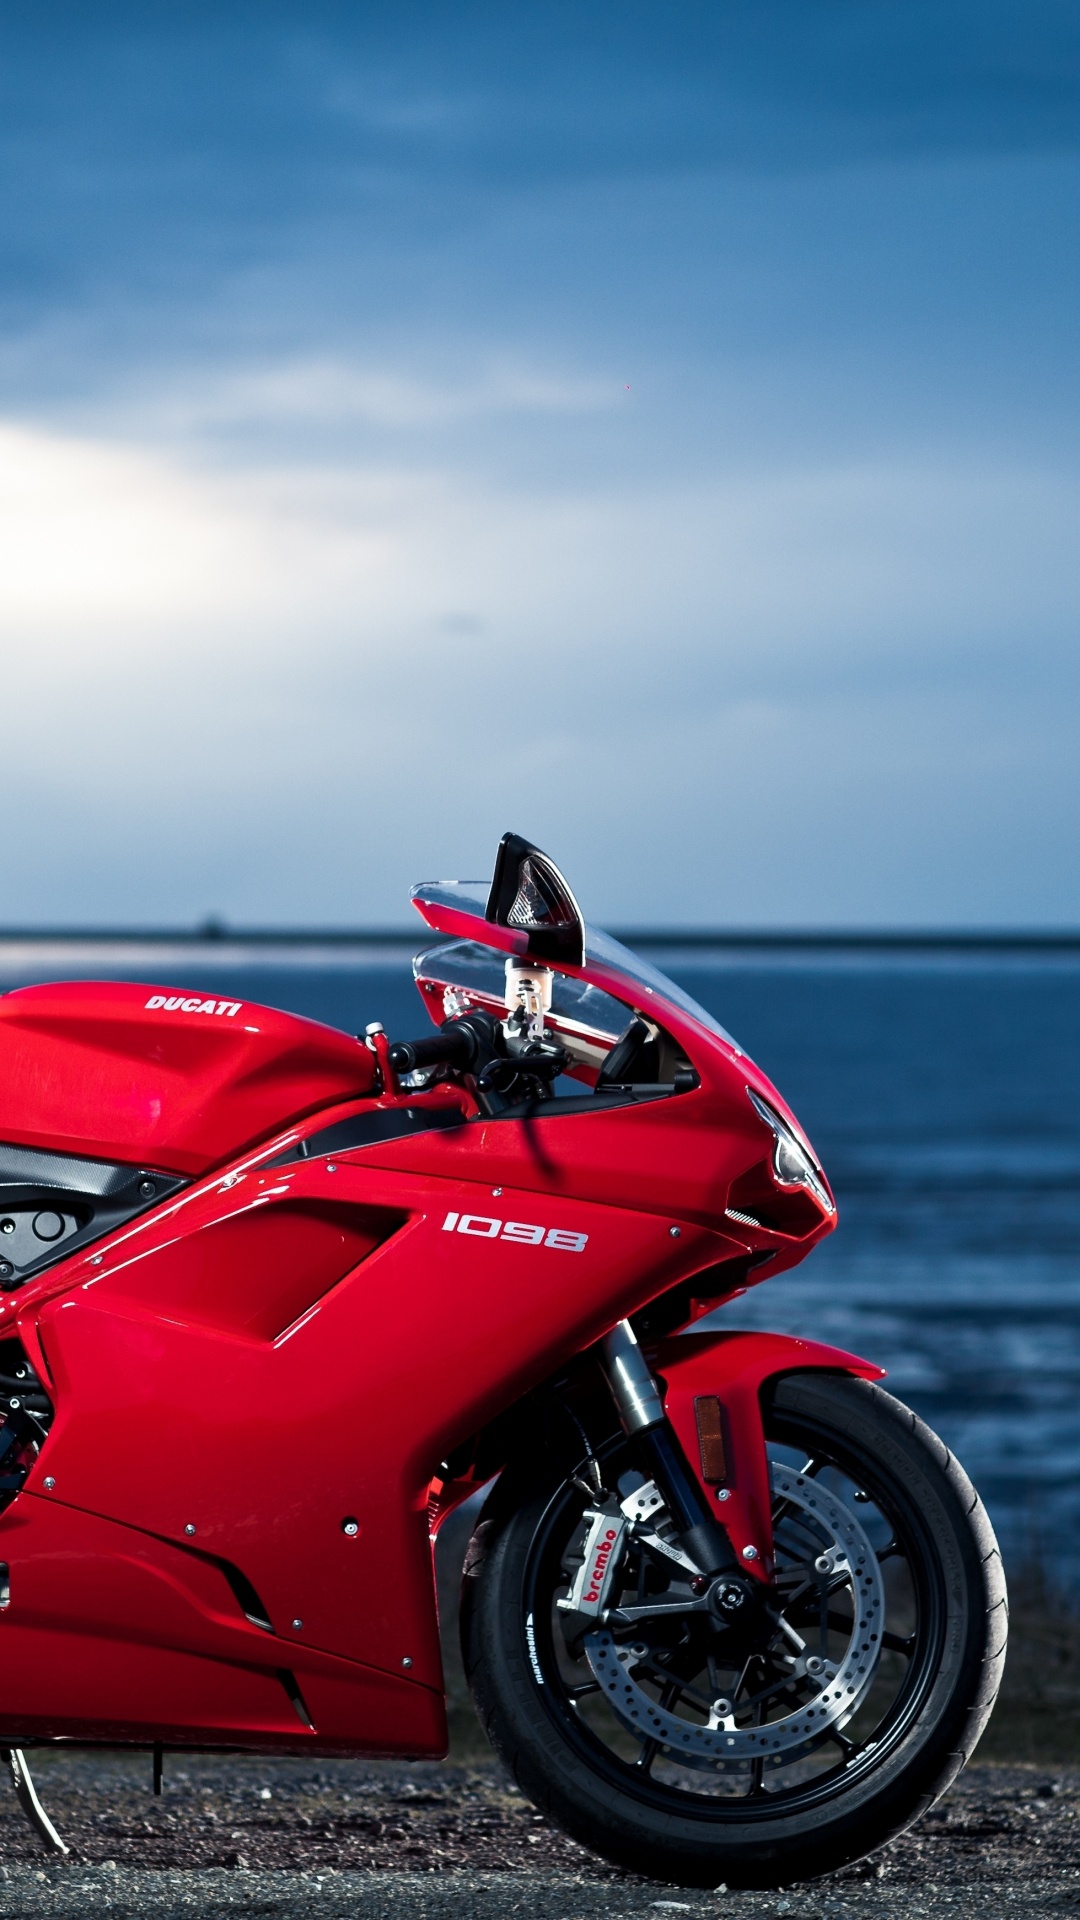 Red and Black Sports Bike on Seashore During Daytime. Wallpaper in 1080x1920 Resolution